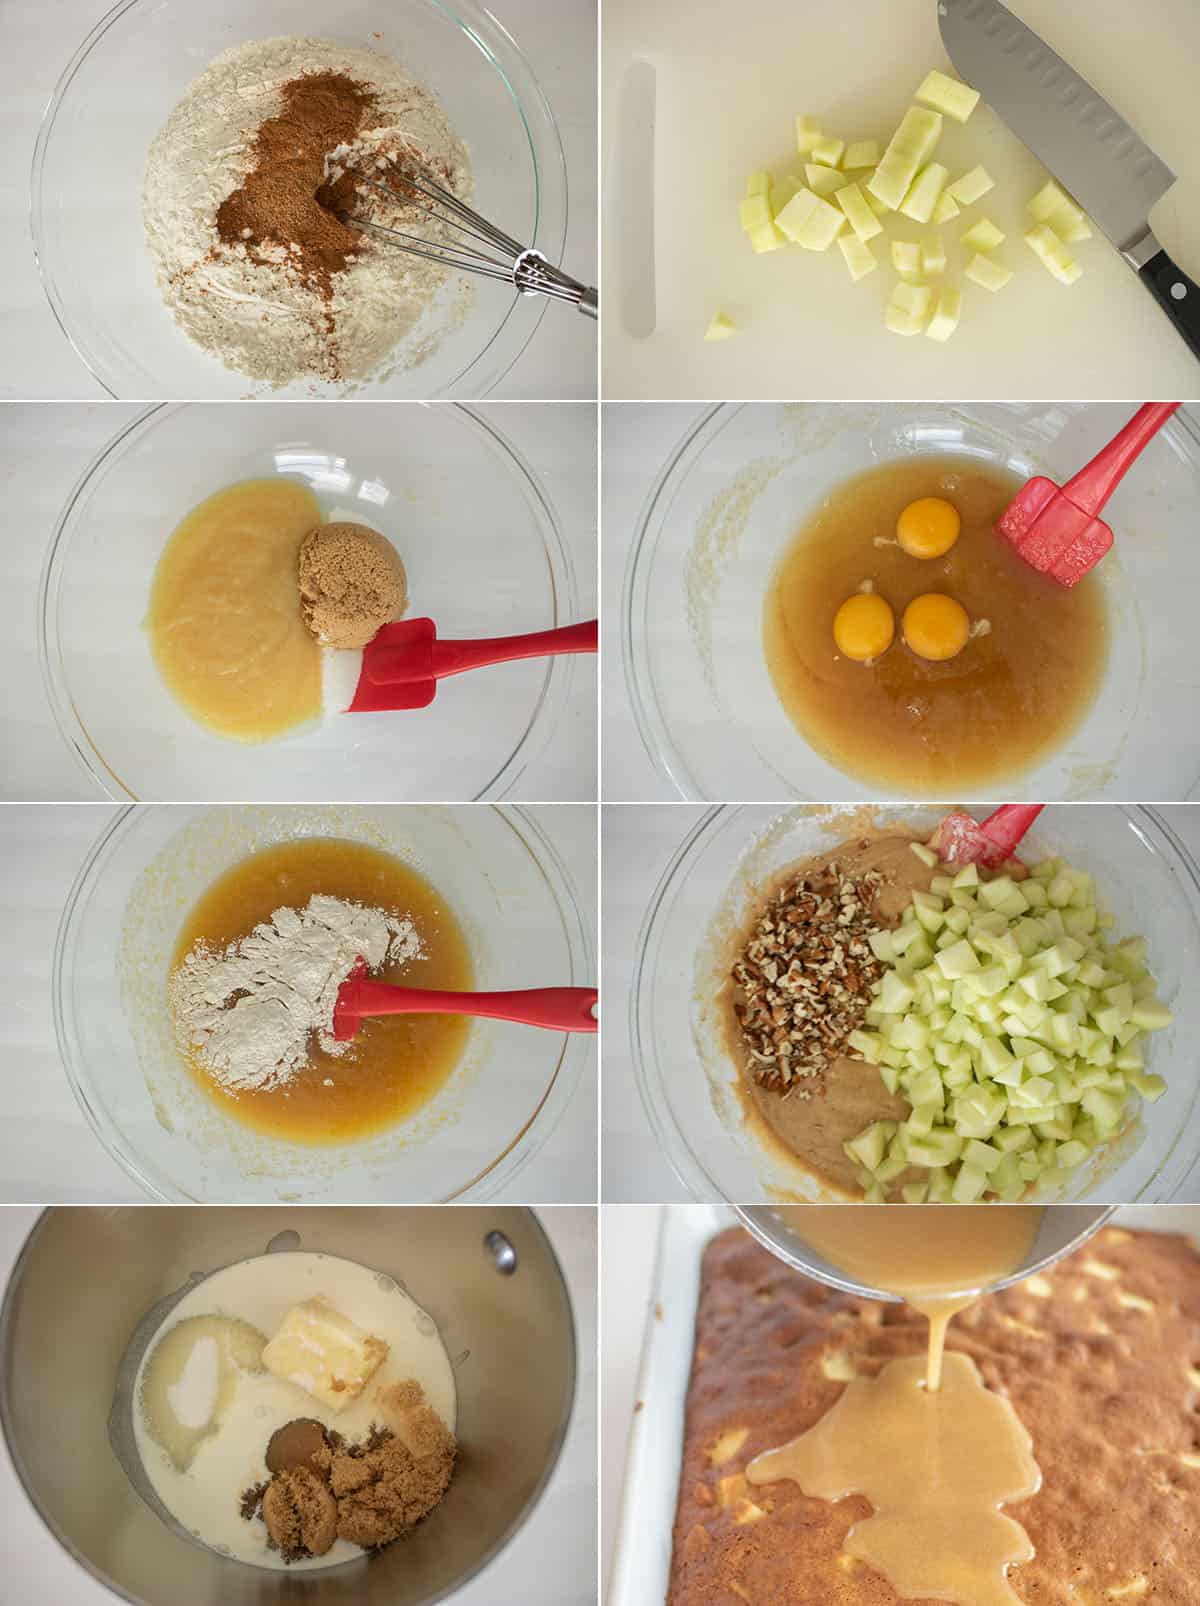 Process for making old fashioned apple cake.